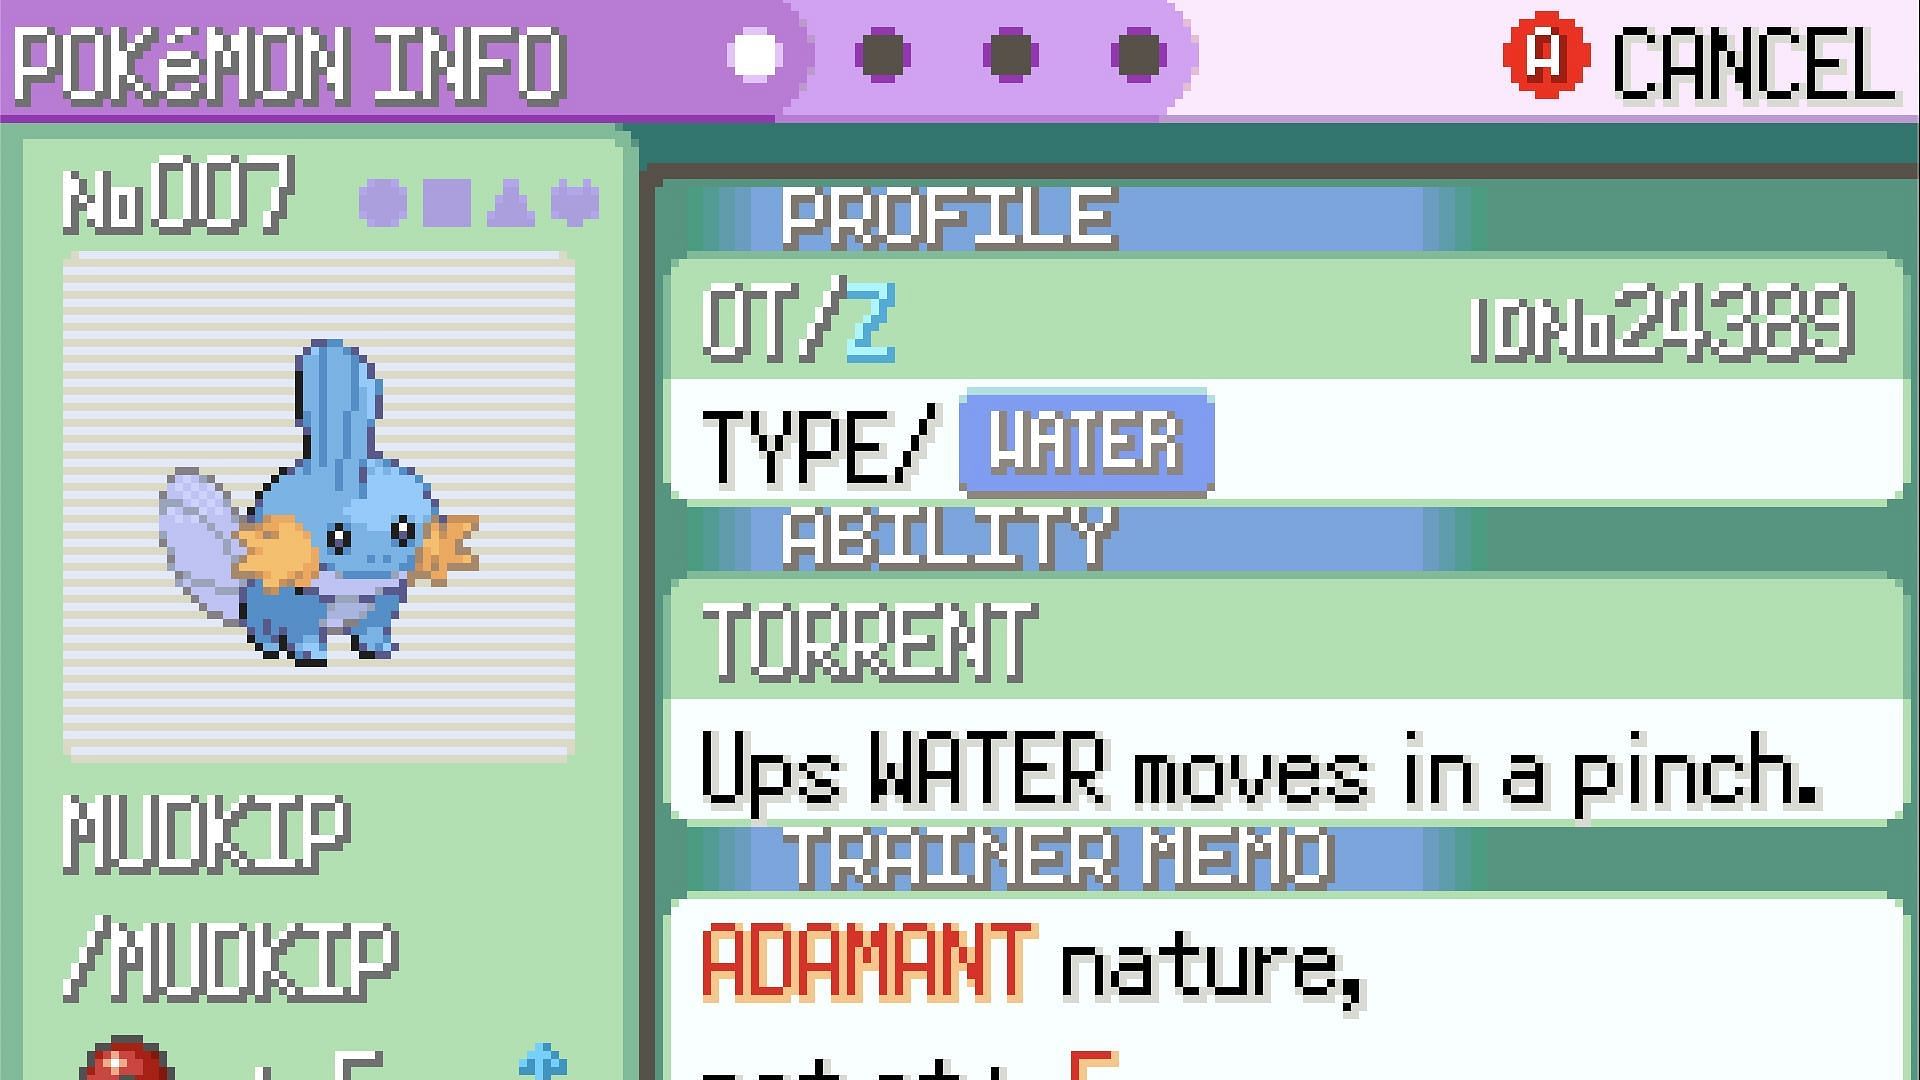 A Pokedex entry for Mudkip showing its nature in the Pokemon series.